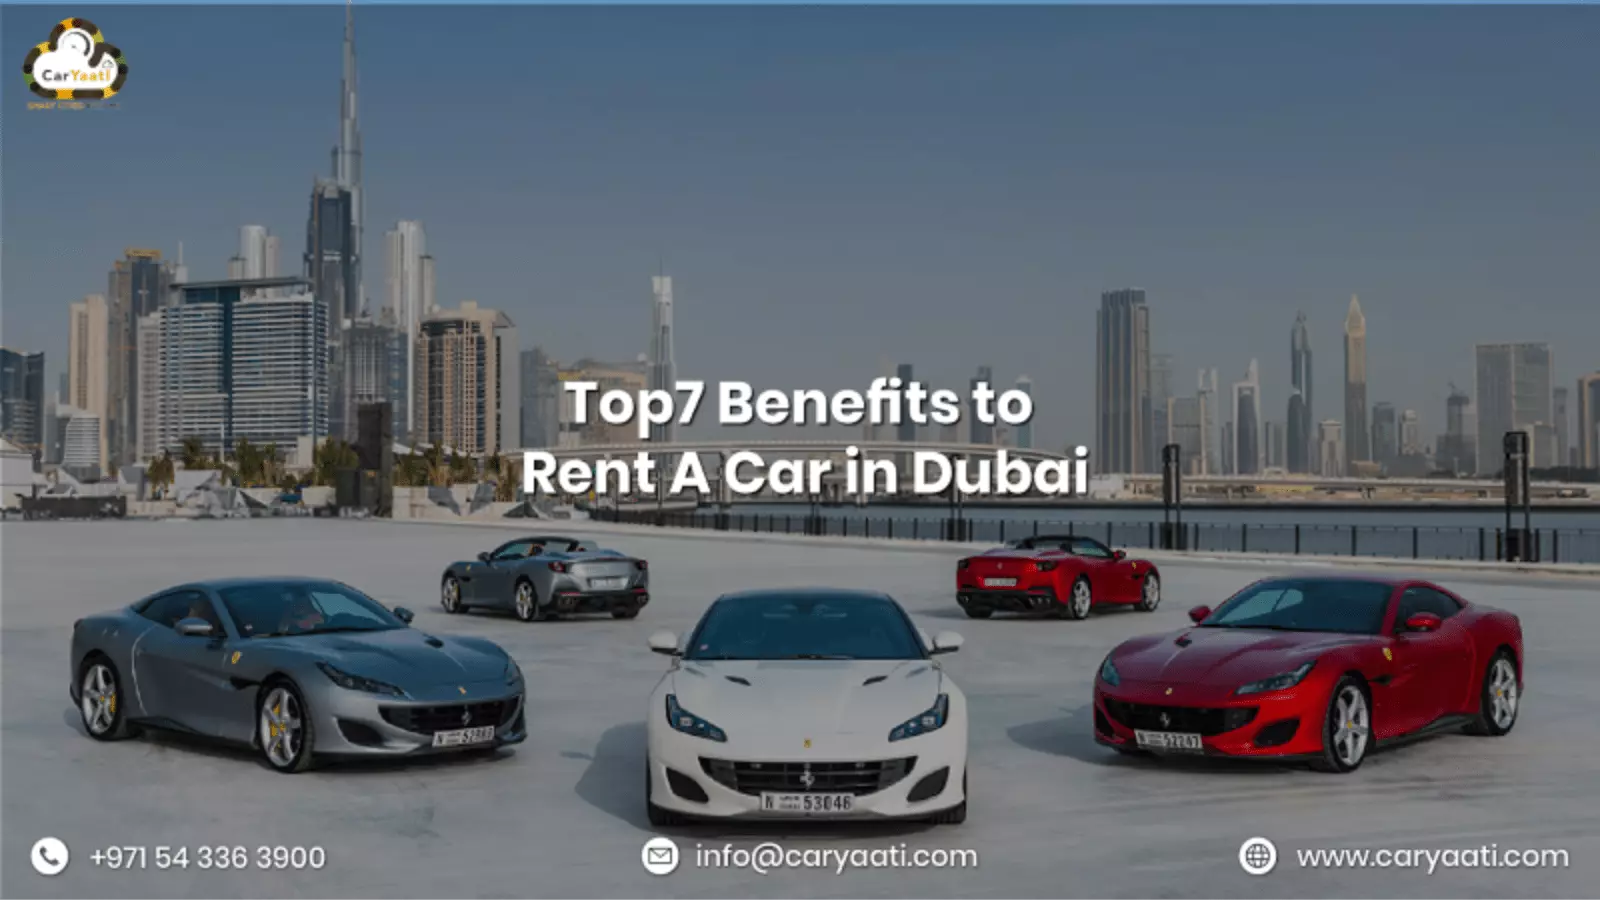 Top 7 Benefits to Rent a Car in Dubai